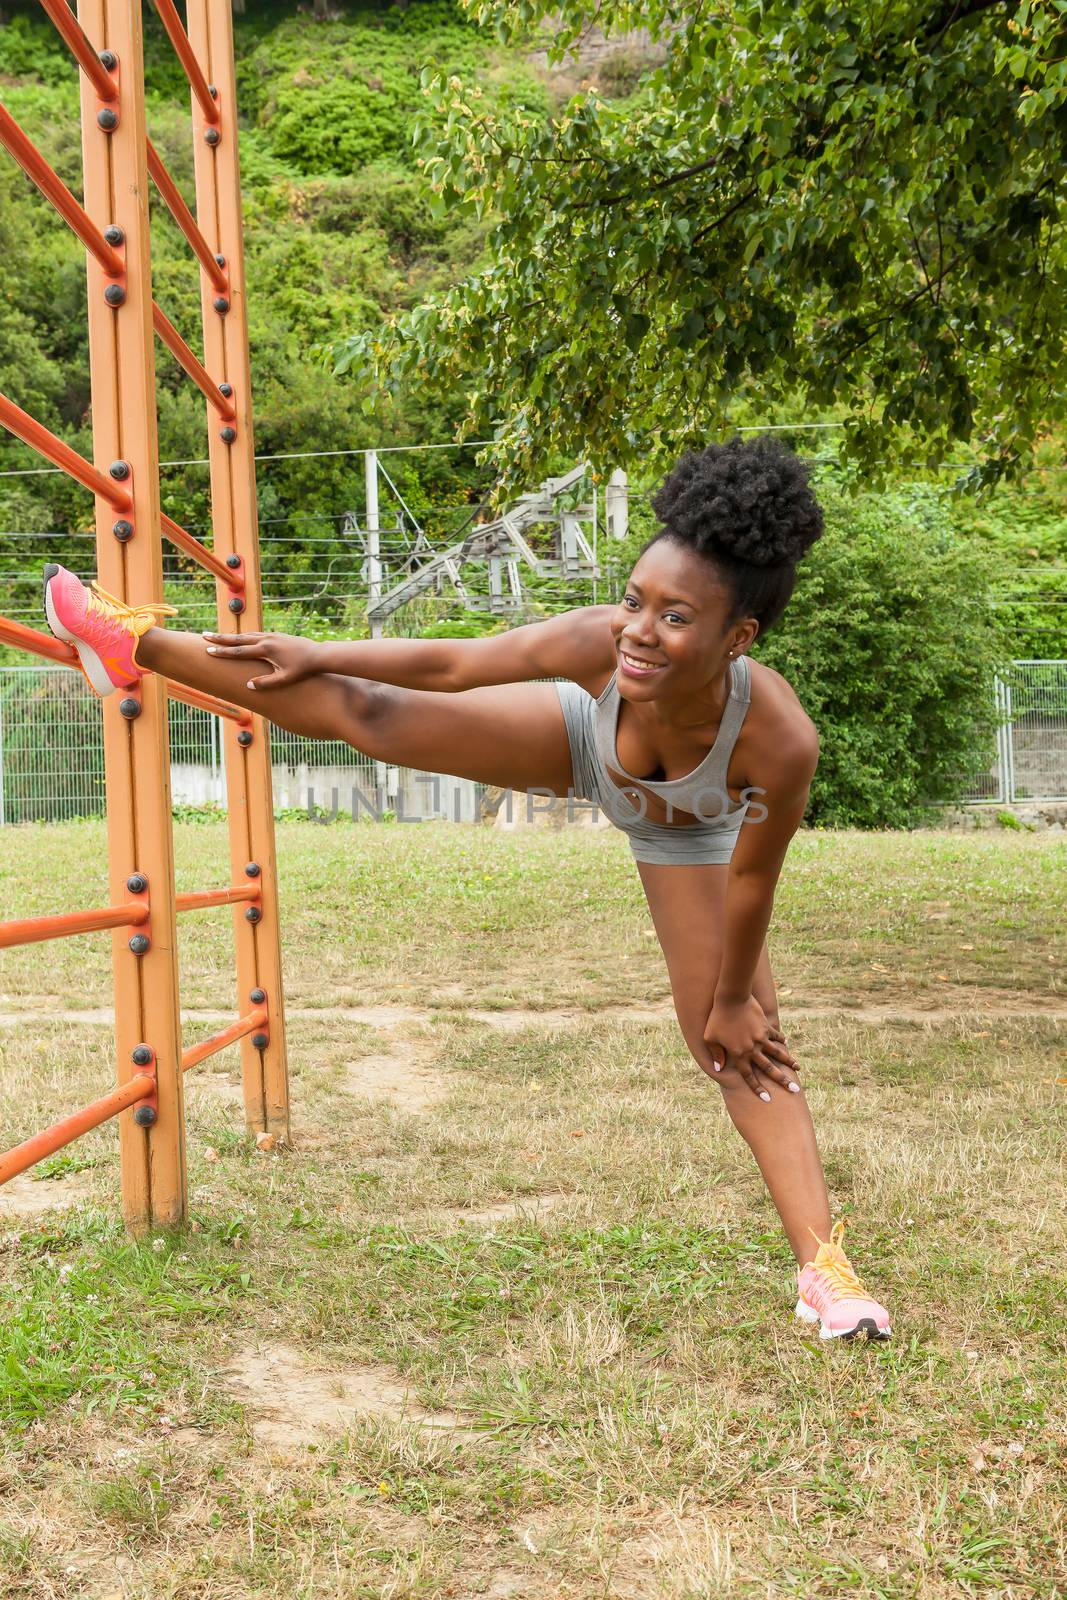 African young woman doing stretching exercises in urban structures for sports in a city park